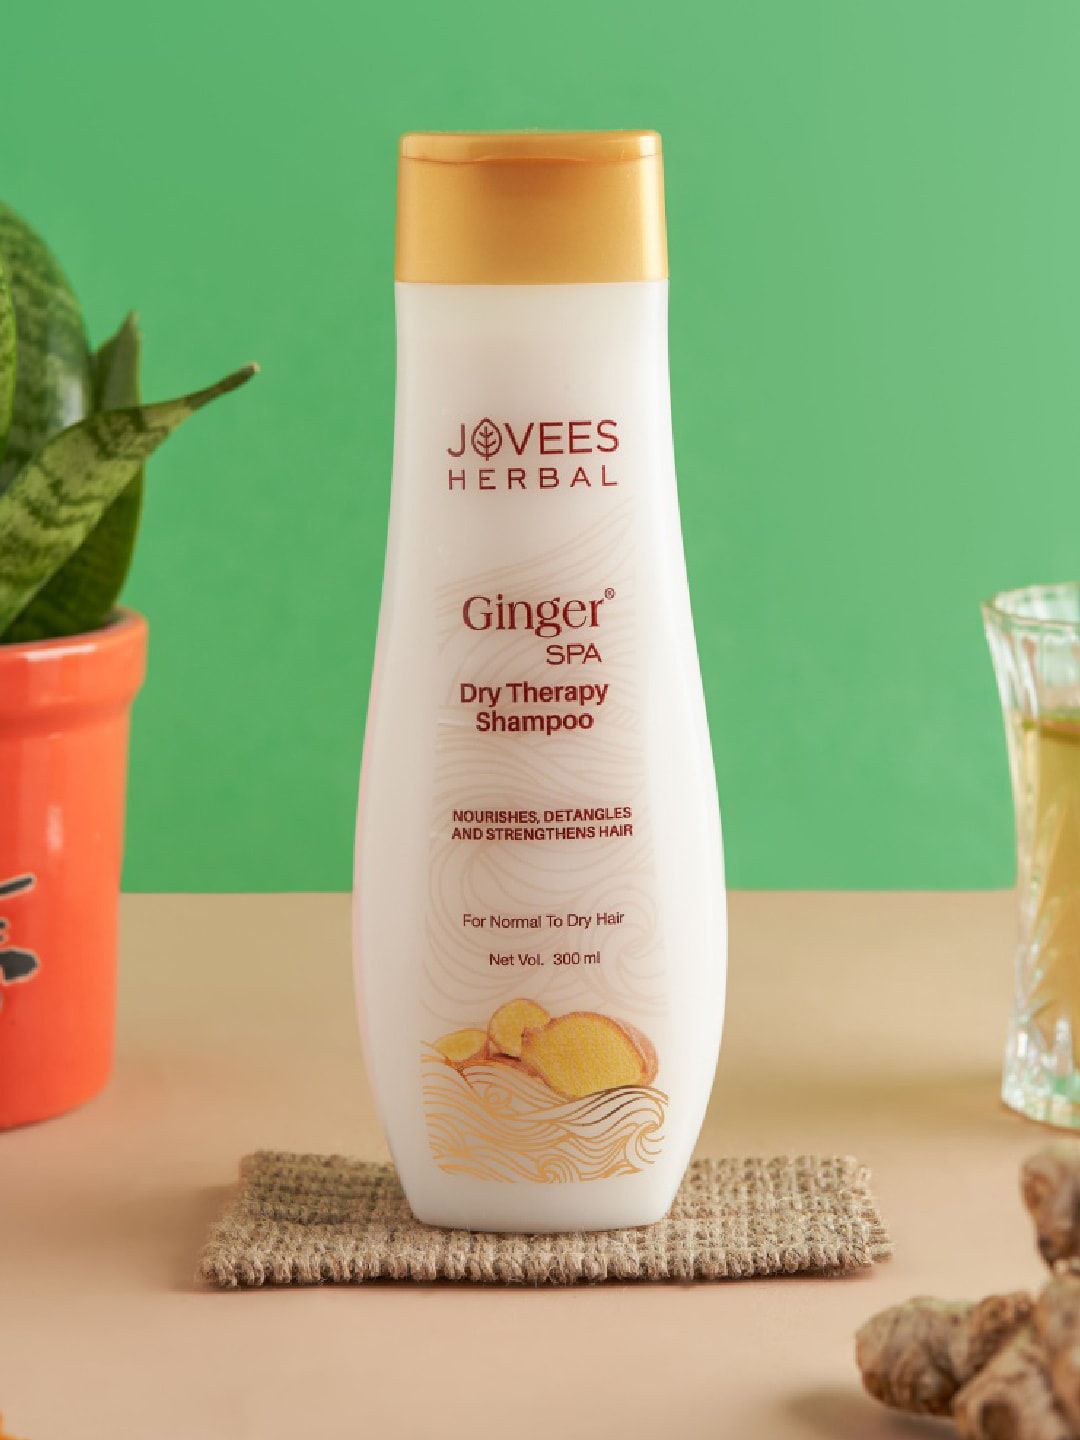 Jovees Ginger Spa Shampoo Price in India